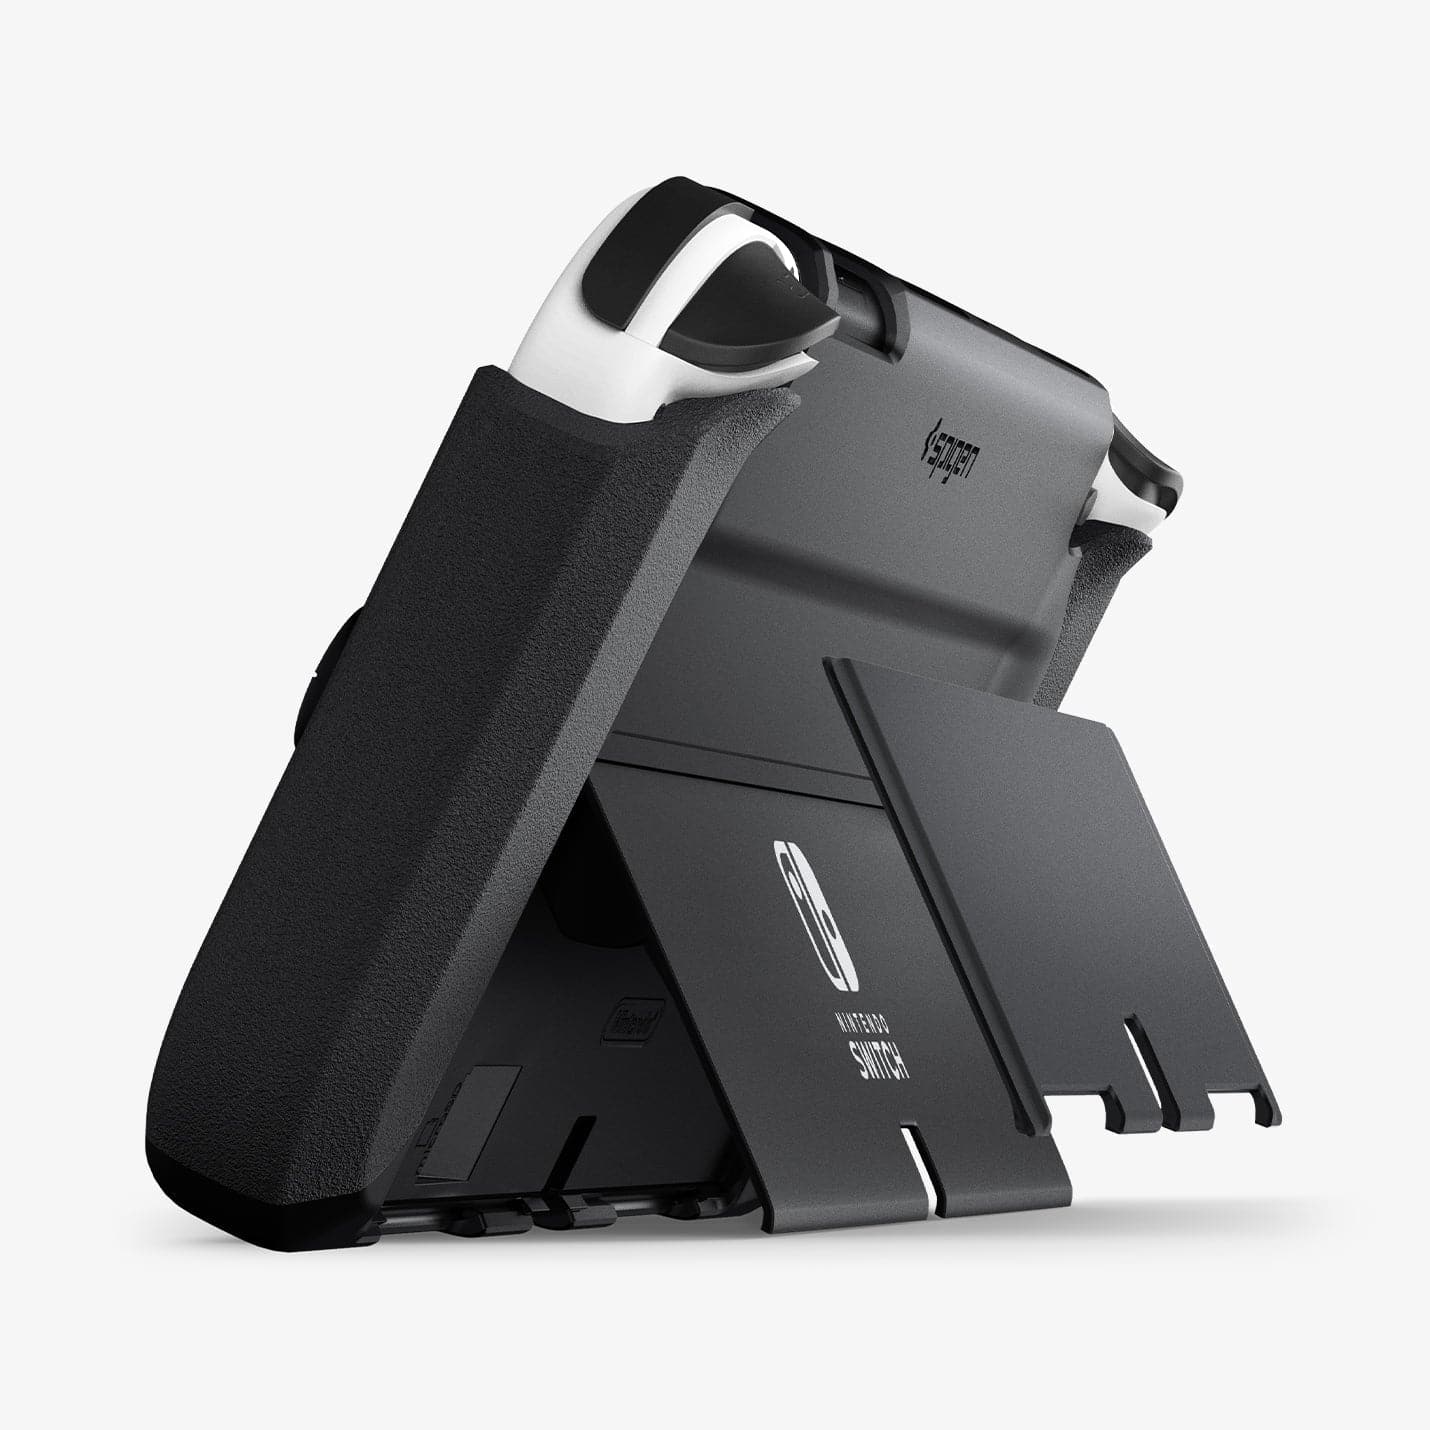 ACS04239 - Nintendo Switch OLED Case Thin Fit in black showing the back and side with device propped by built in kickstand